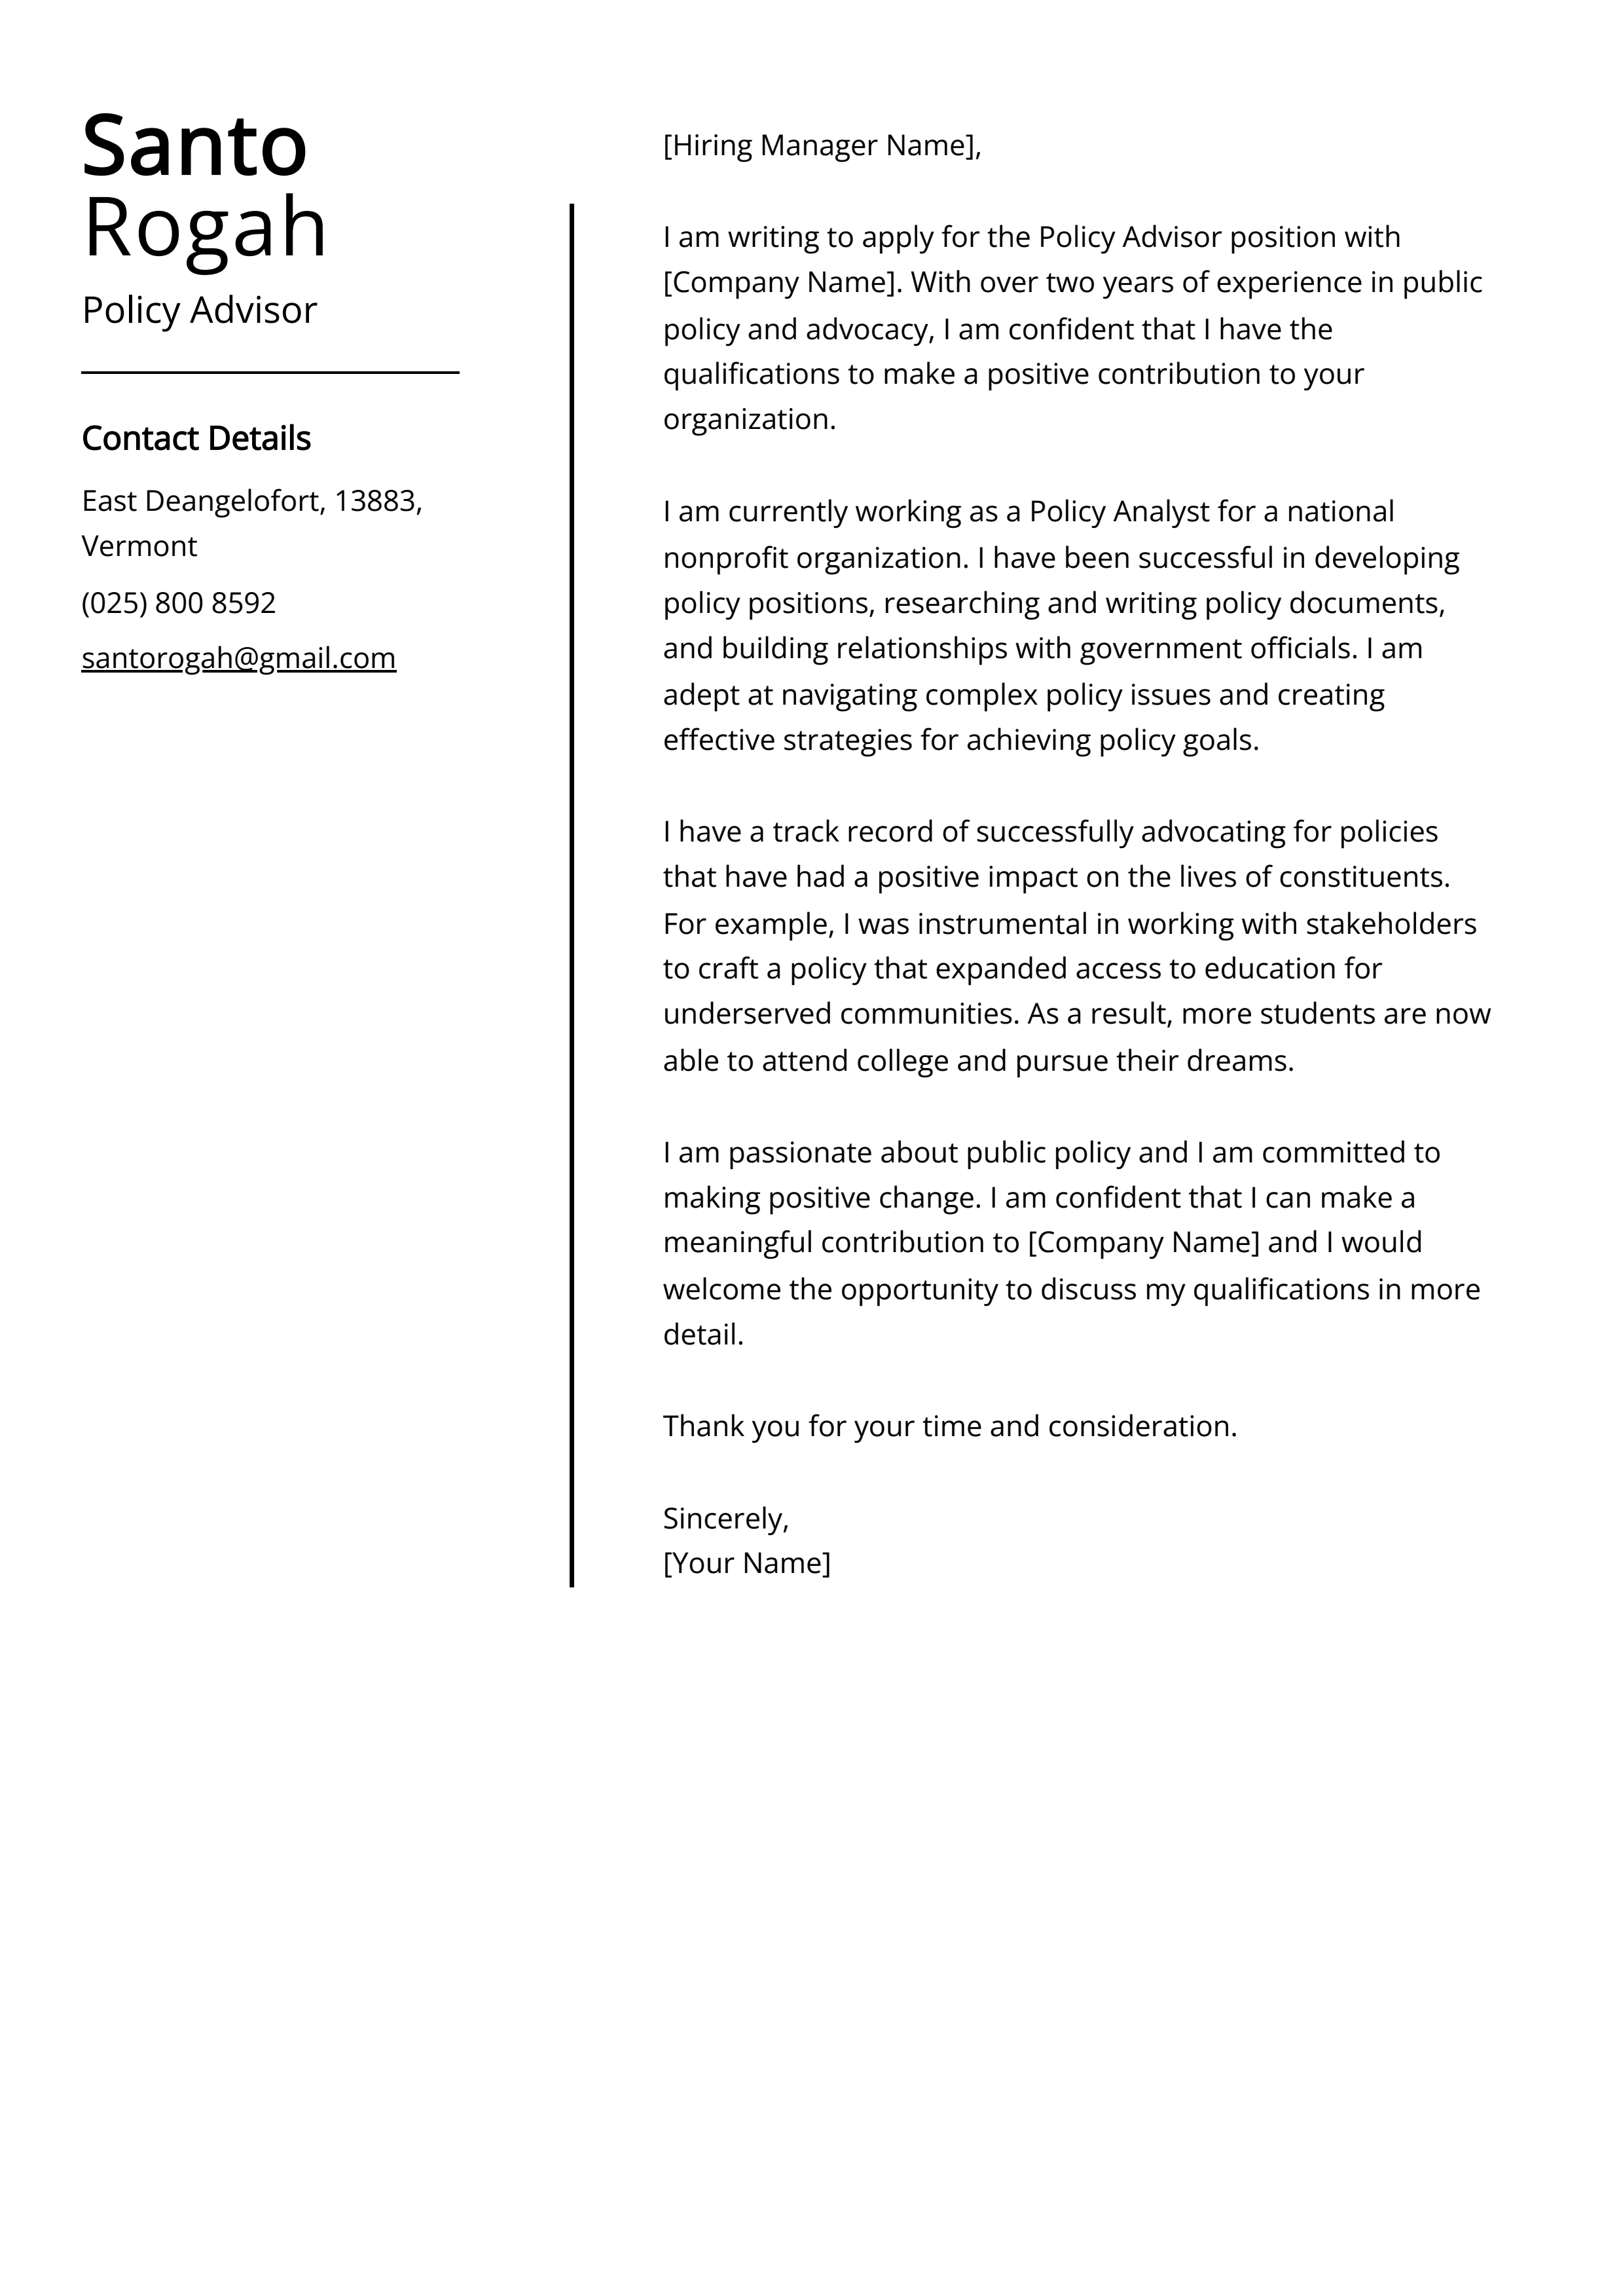 Policy Advisor Cover Letter Example